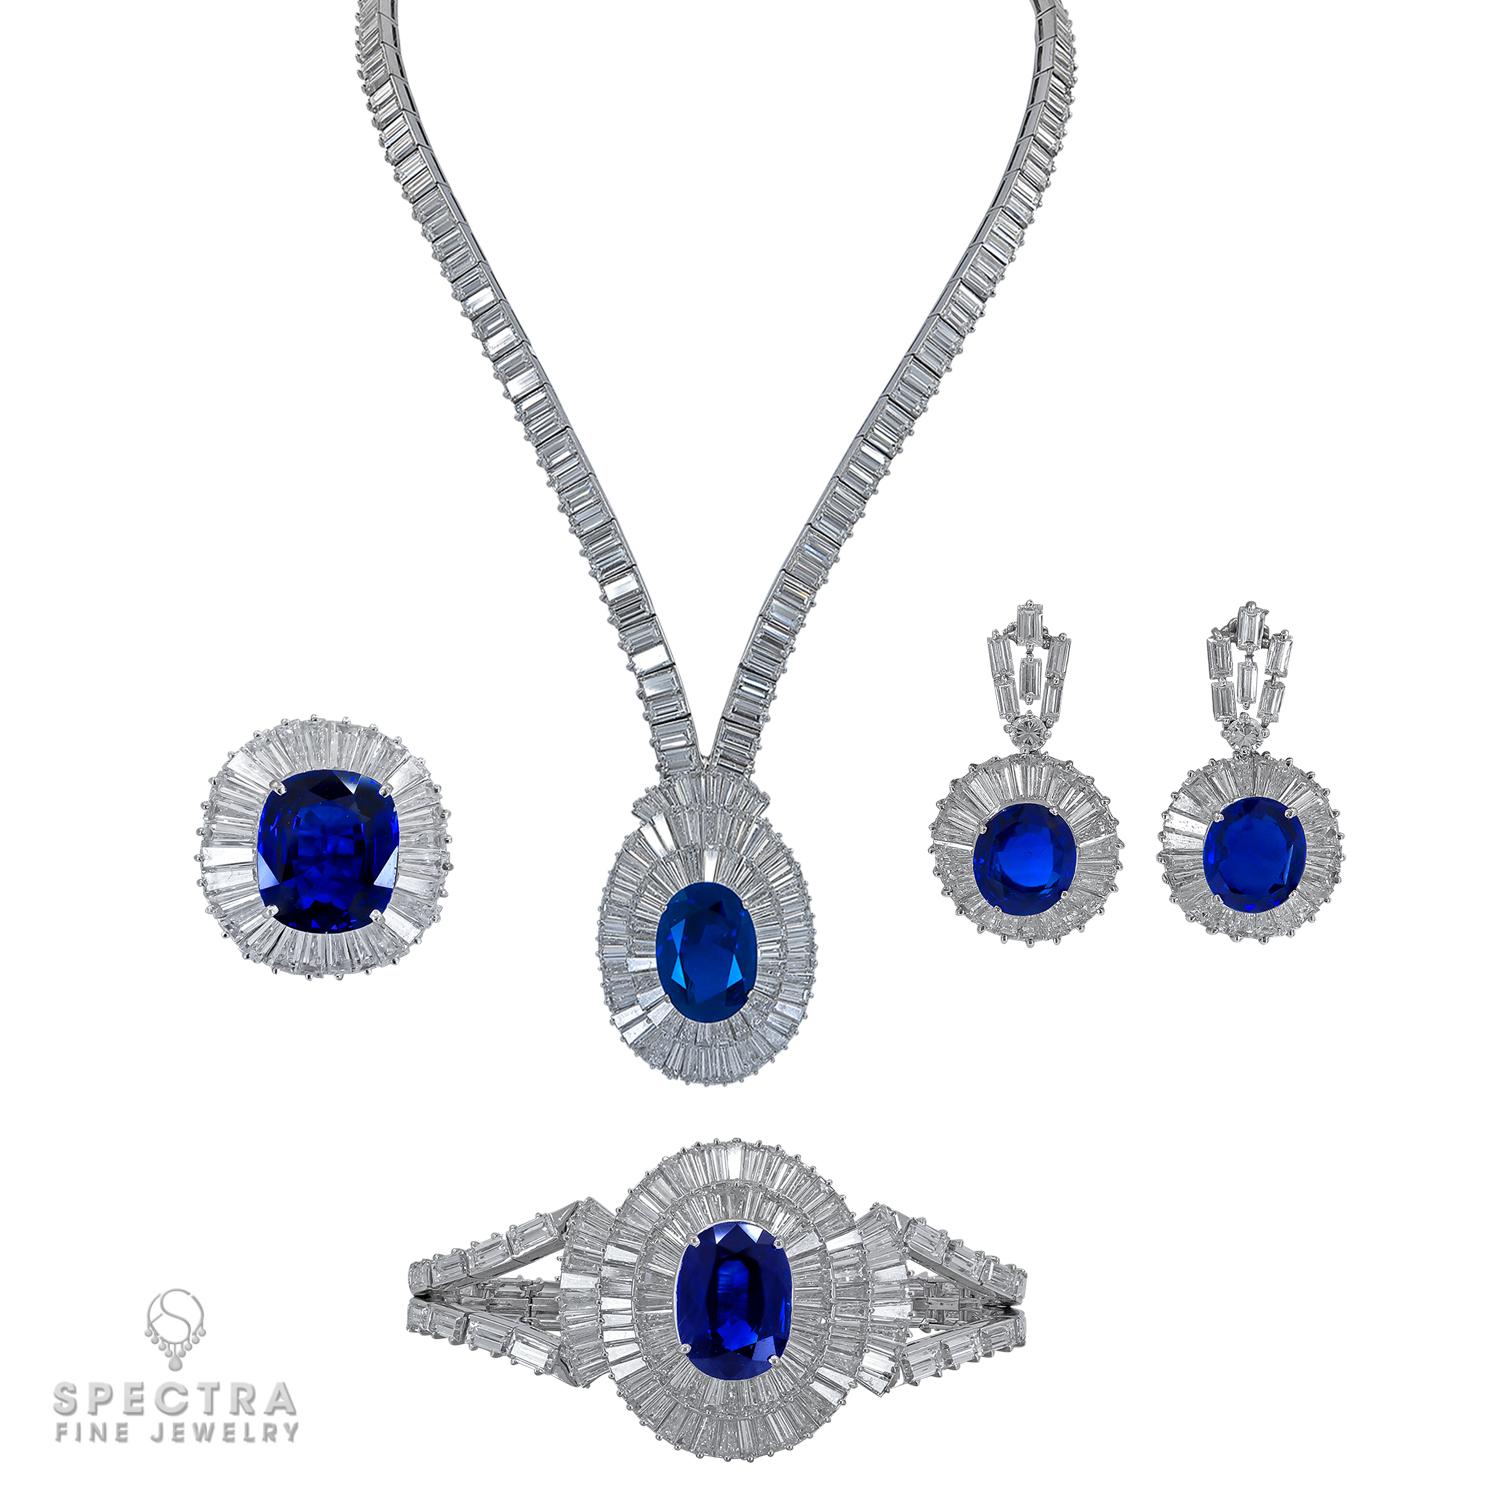 Whether you are an enthusiast of jewelry in the Art Deco style or a seasoned collector, you are likely also a fan of baguette diamonds and the hypnotizing geometric ribbons of light they create. This stunning Mouawad Sapphire and Diamond Parure